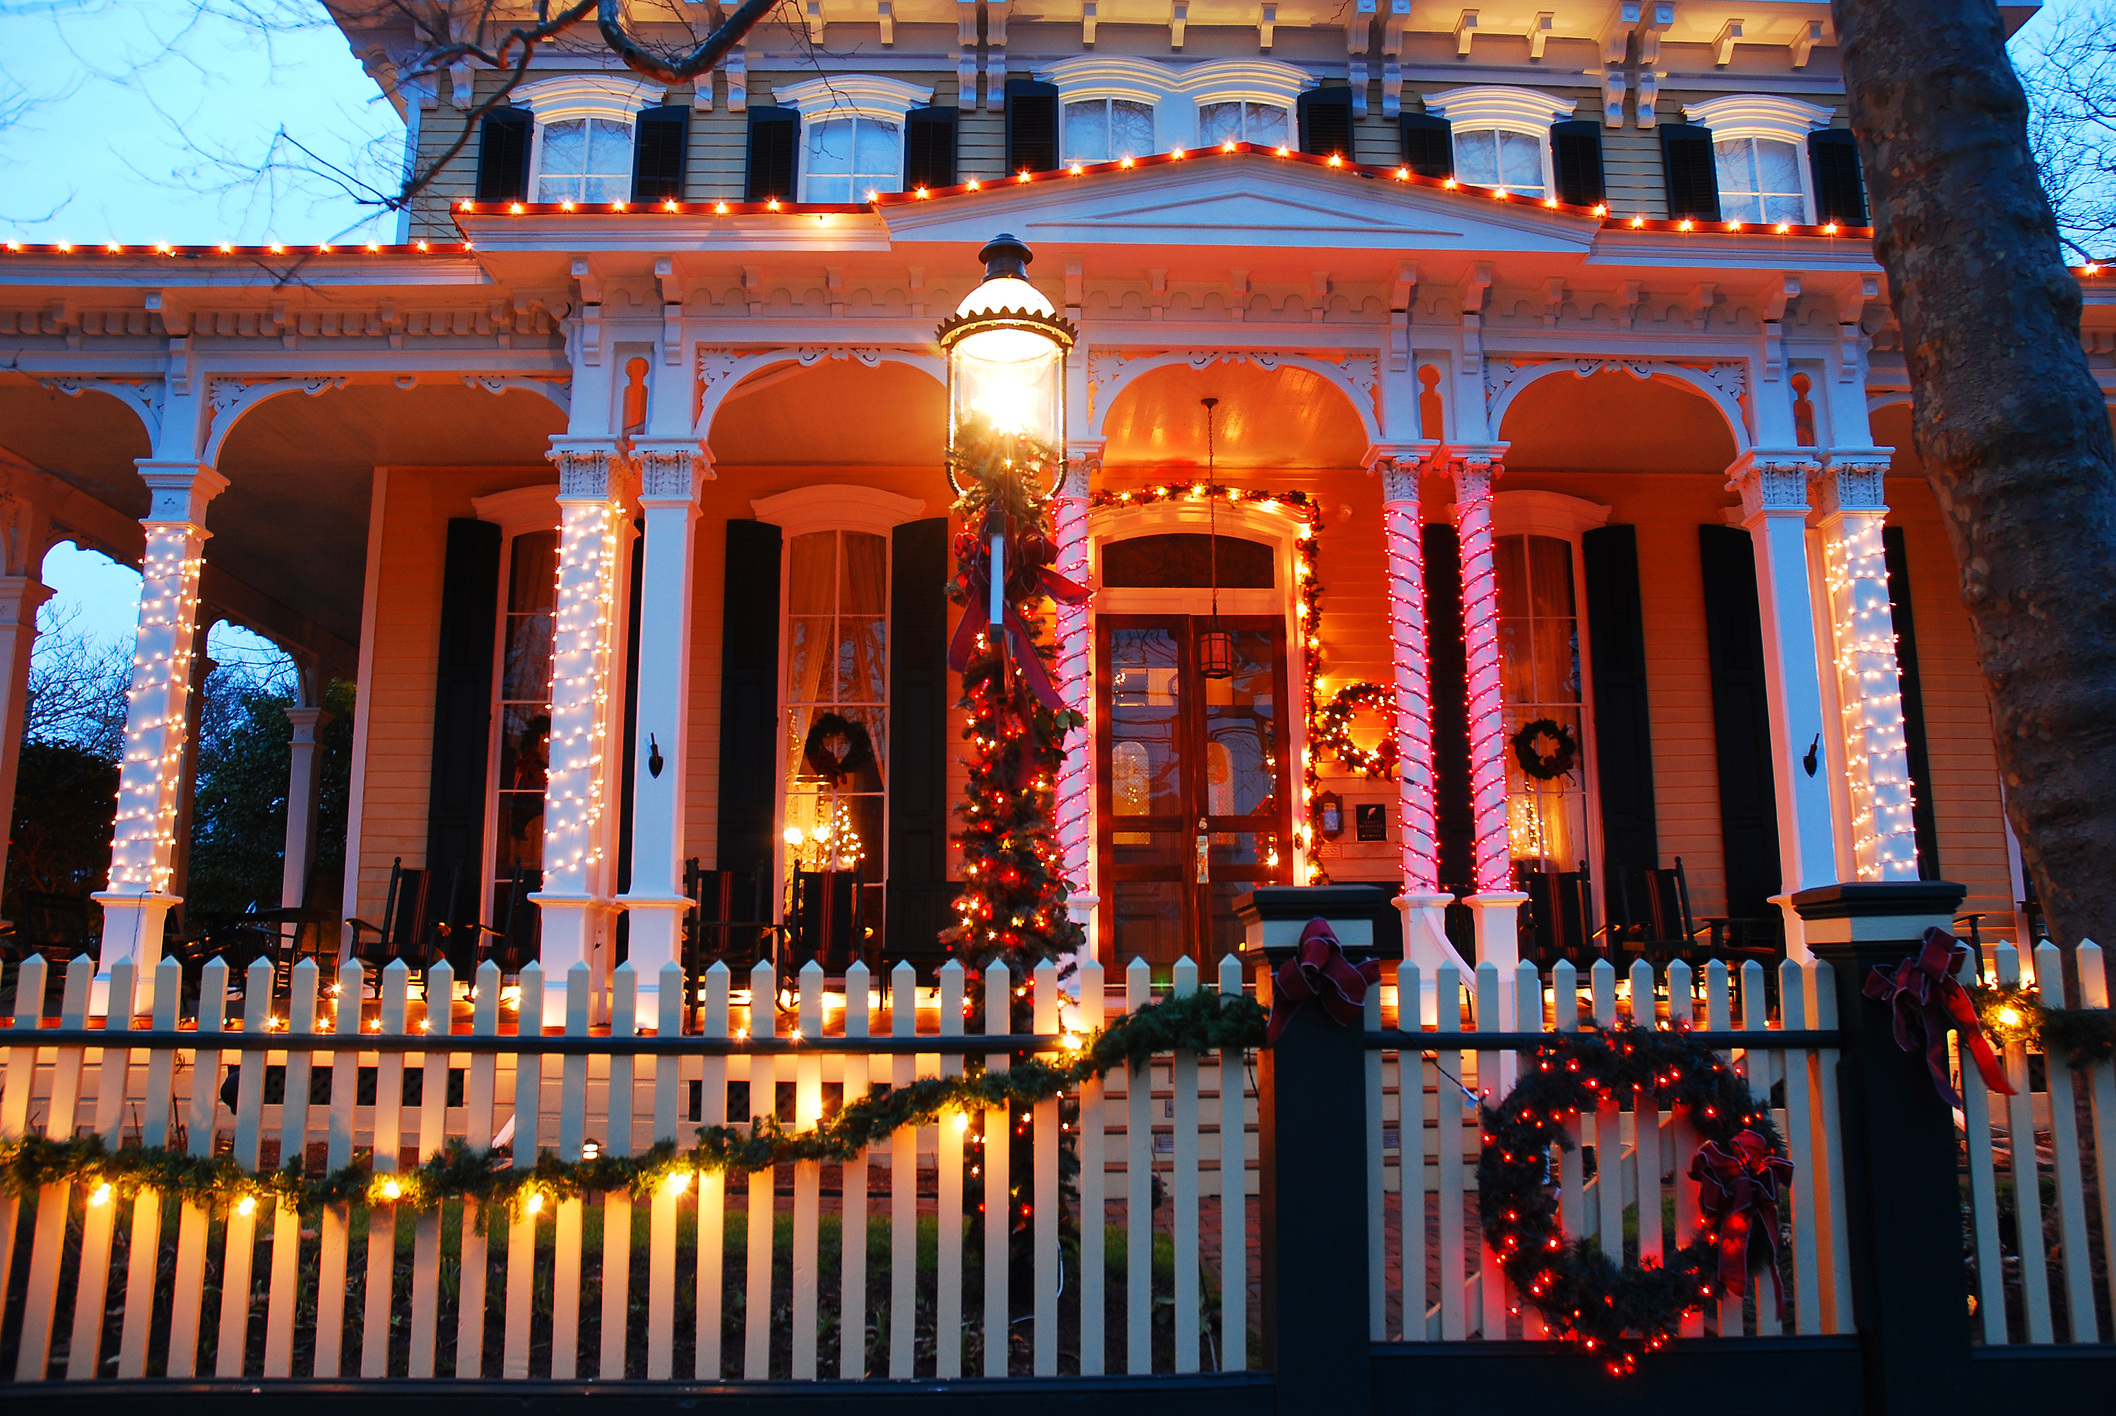 The exterior of an elegant Victorian era home beautifully decorated for the Christmas holidays